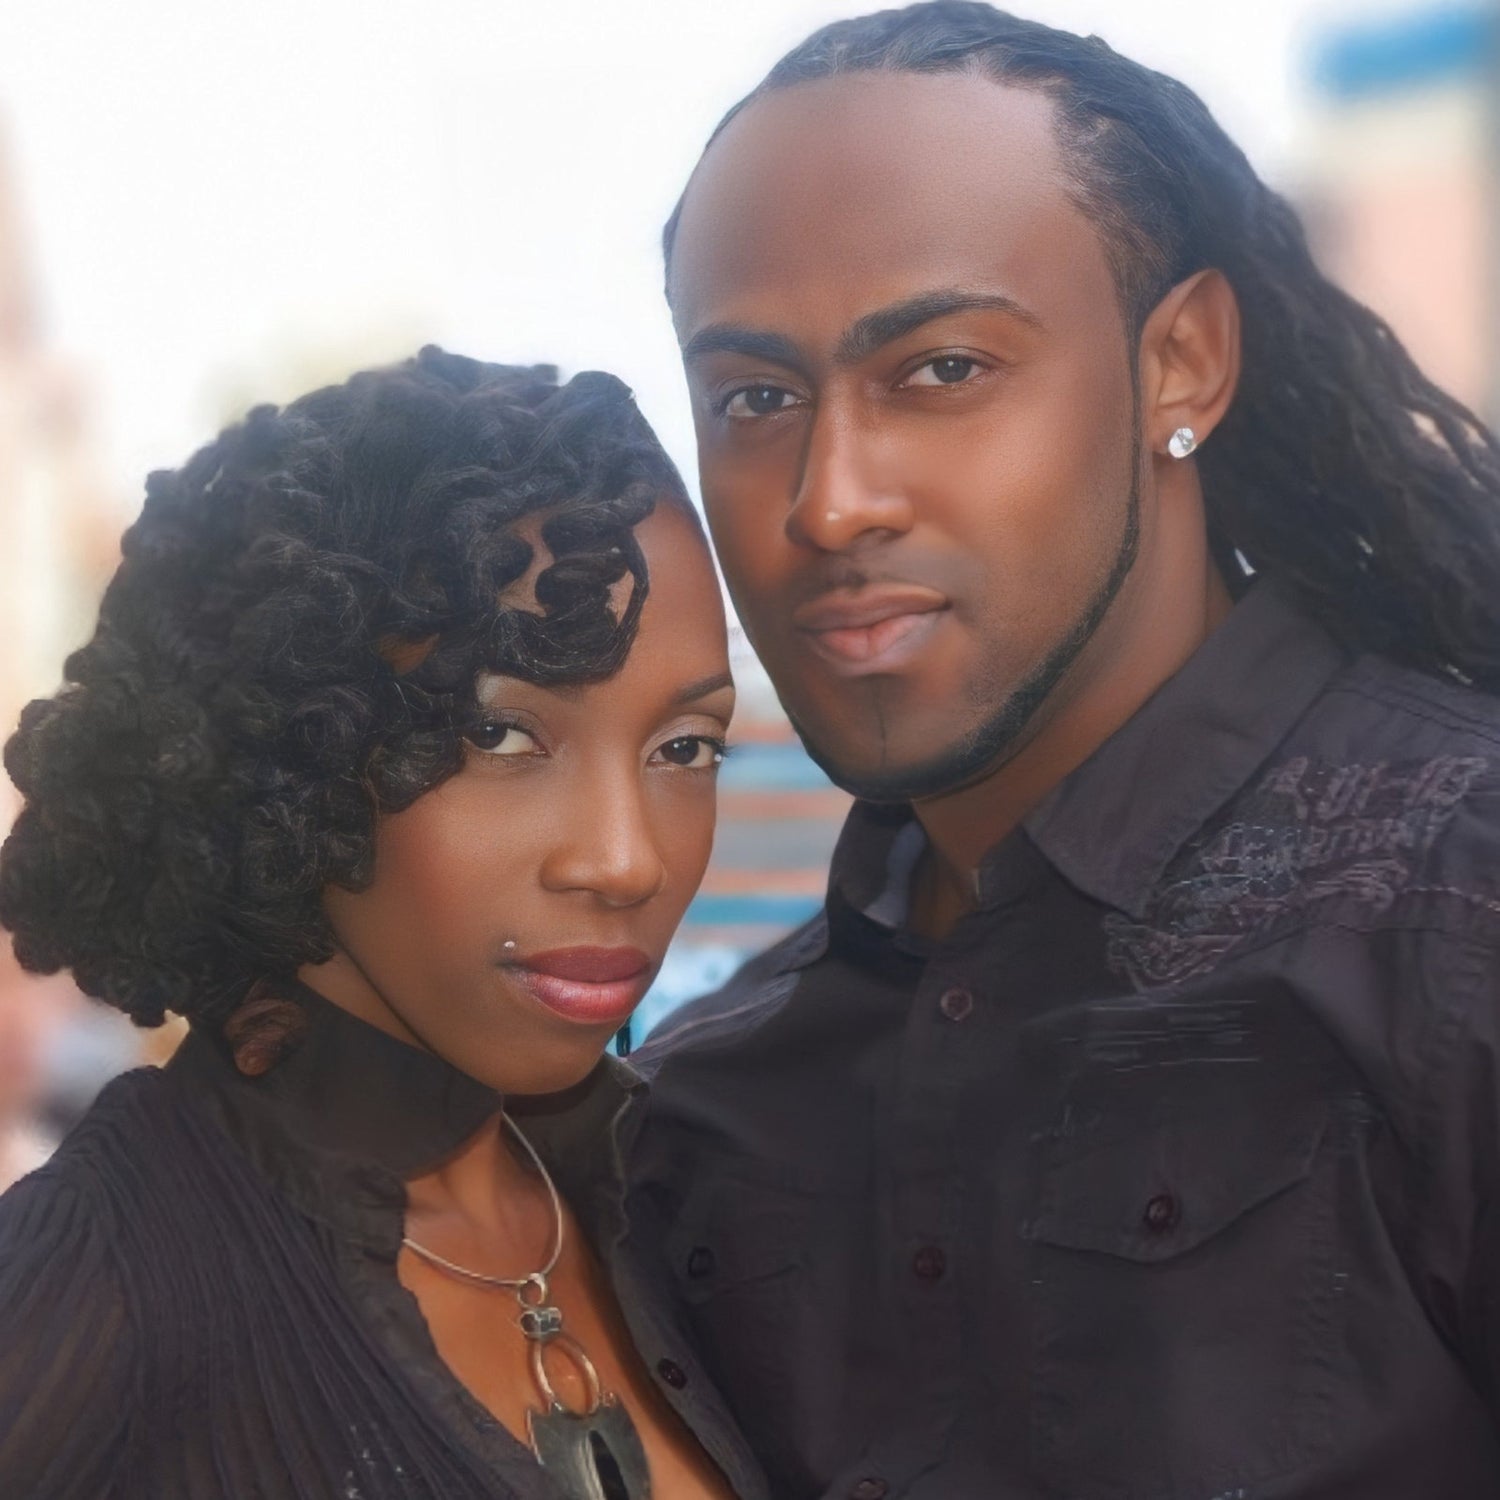 Locs styled a couple. Woman with curled styled Dreadlocks and a Man with long locs crinkled.